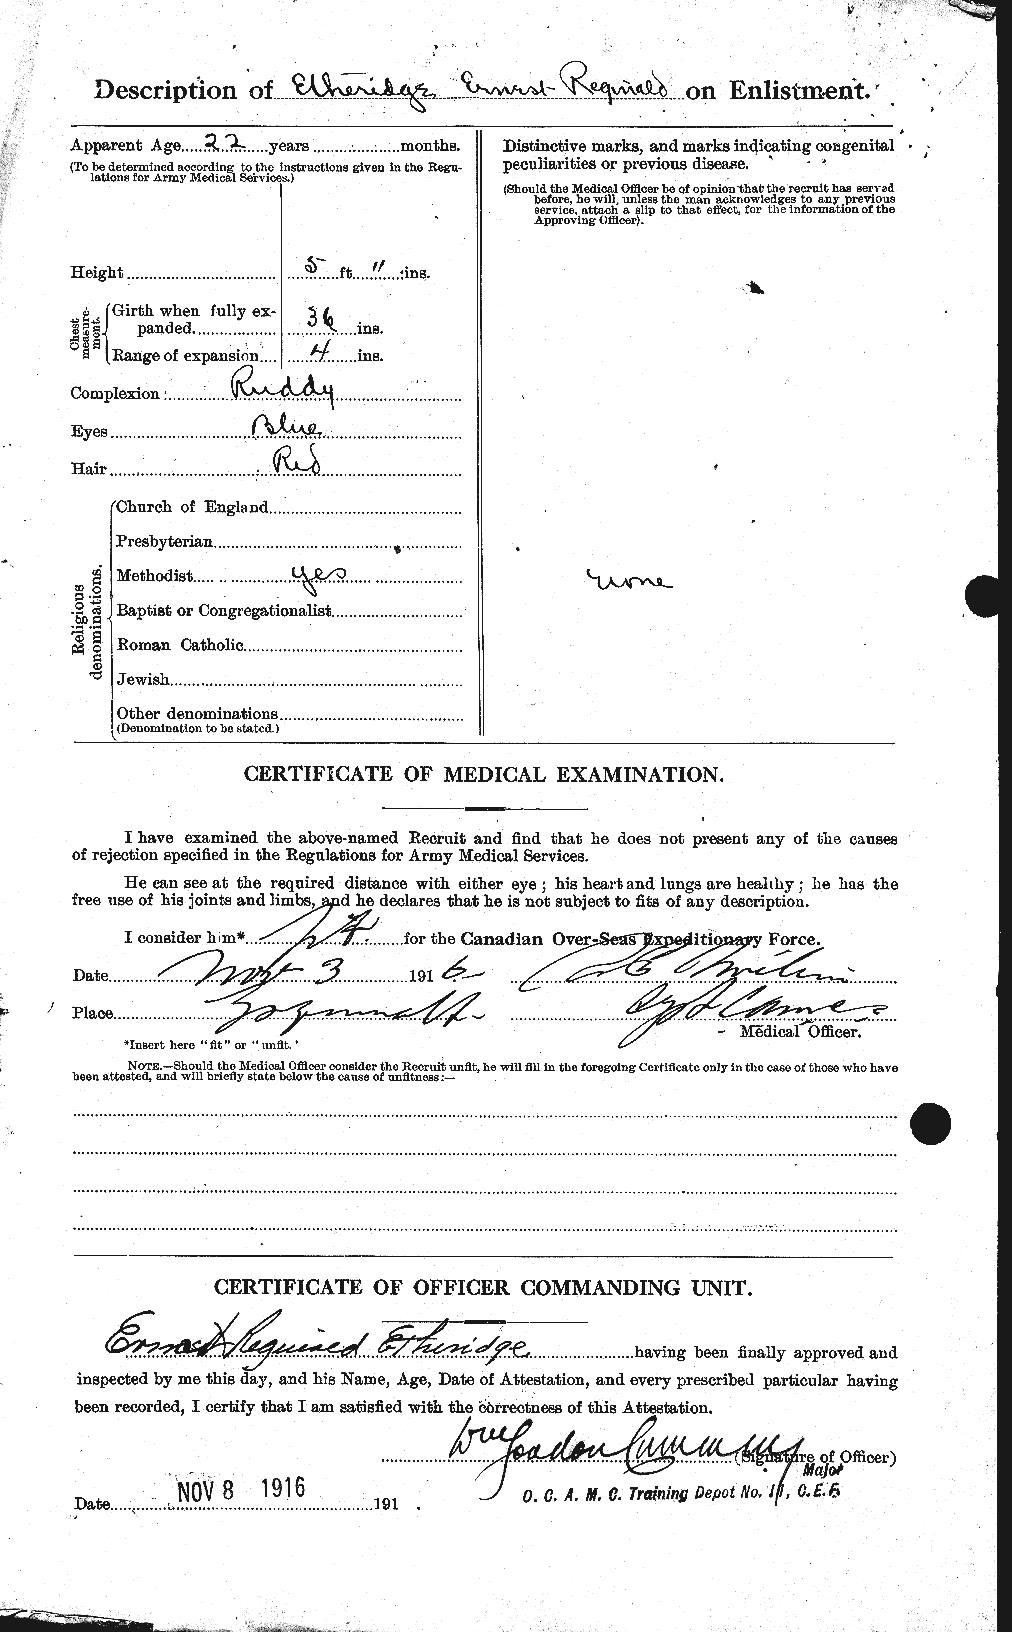 Personnel Records of the First World War - CEF 313738b